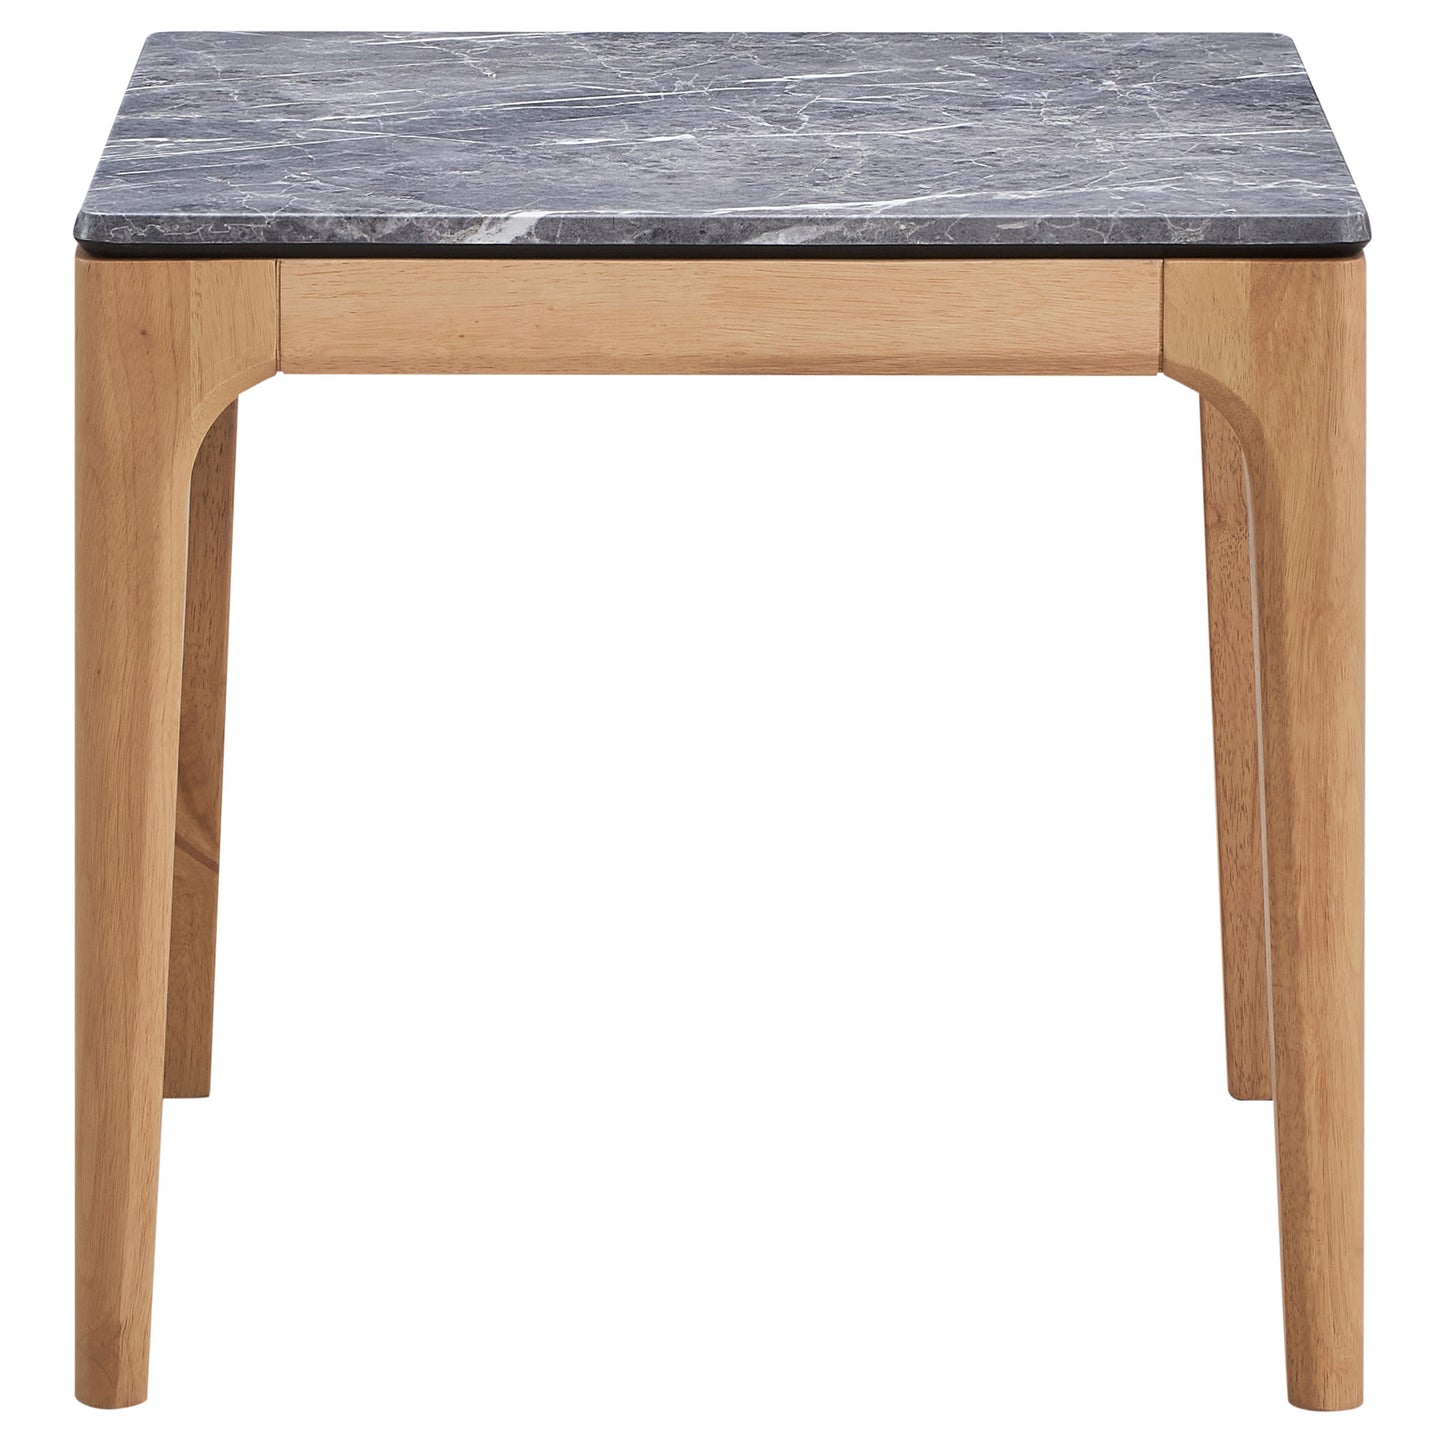 Polaris Rectangular End Table with Marble-like Top Teramo and Light Oak